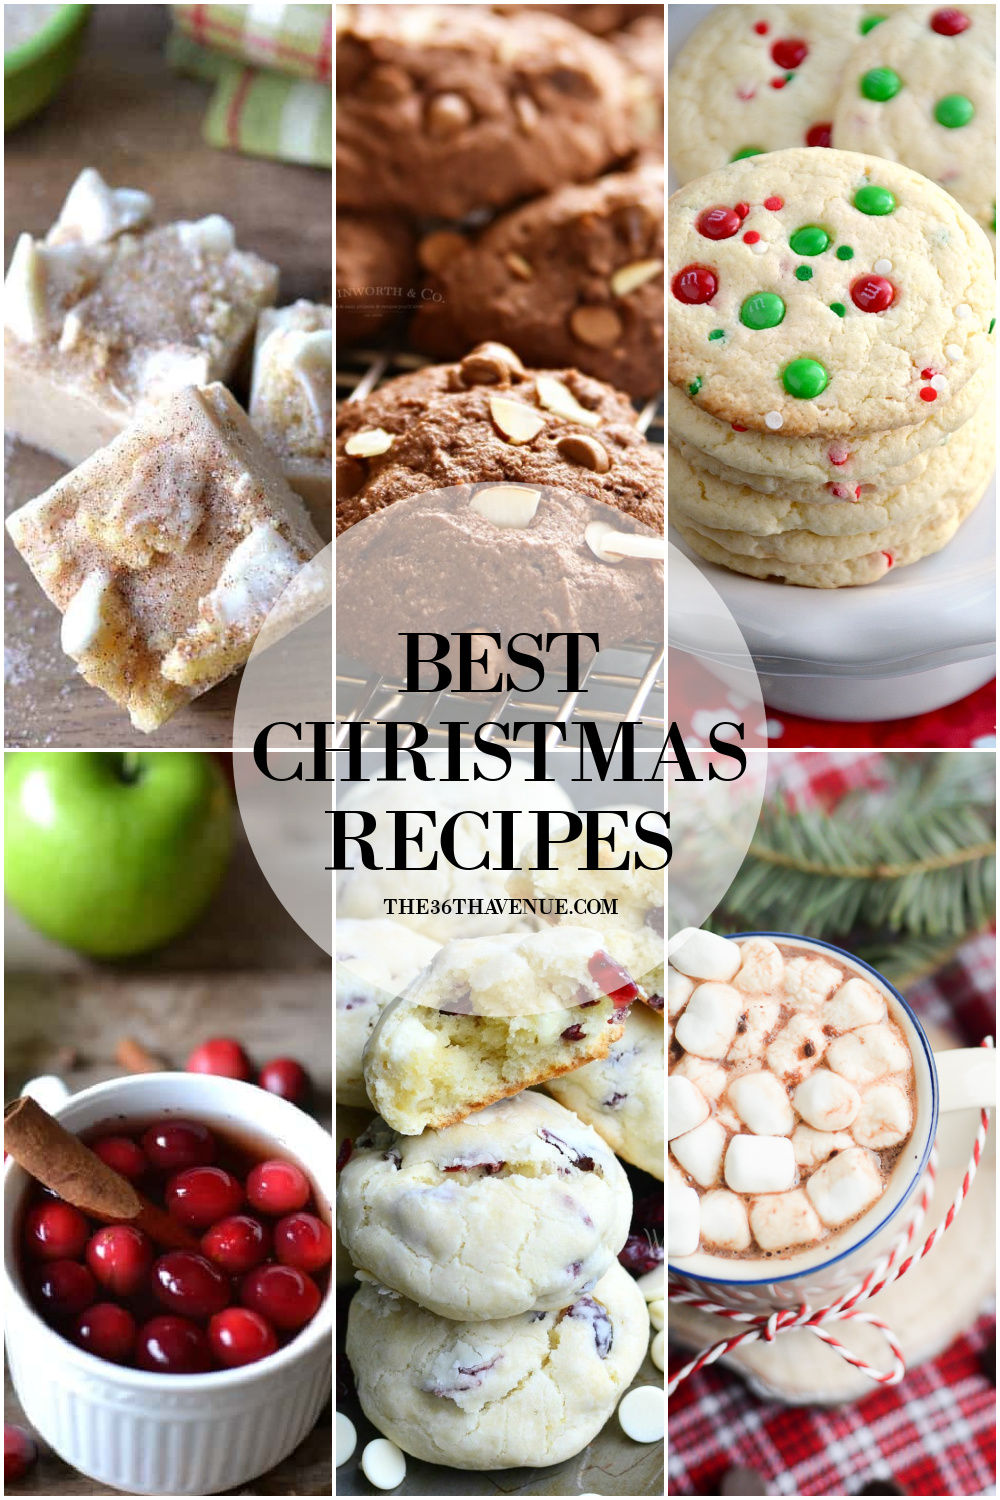 BEST CHRISTMAS RECIPES The 36th AVENUE